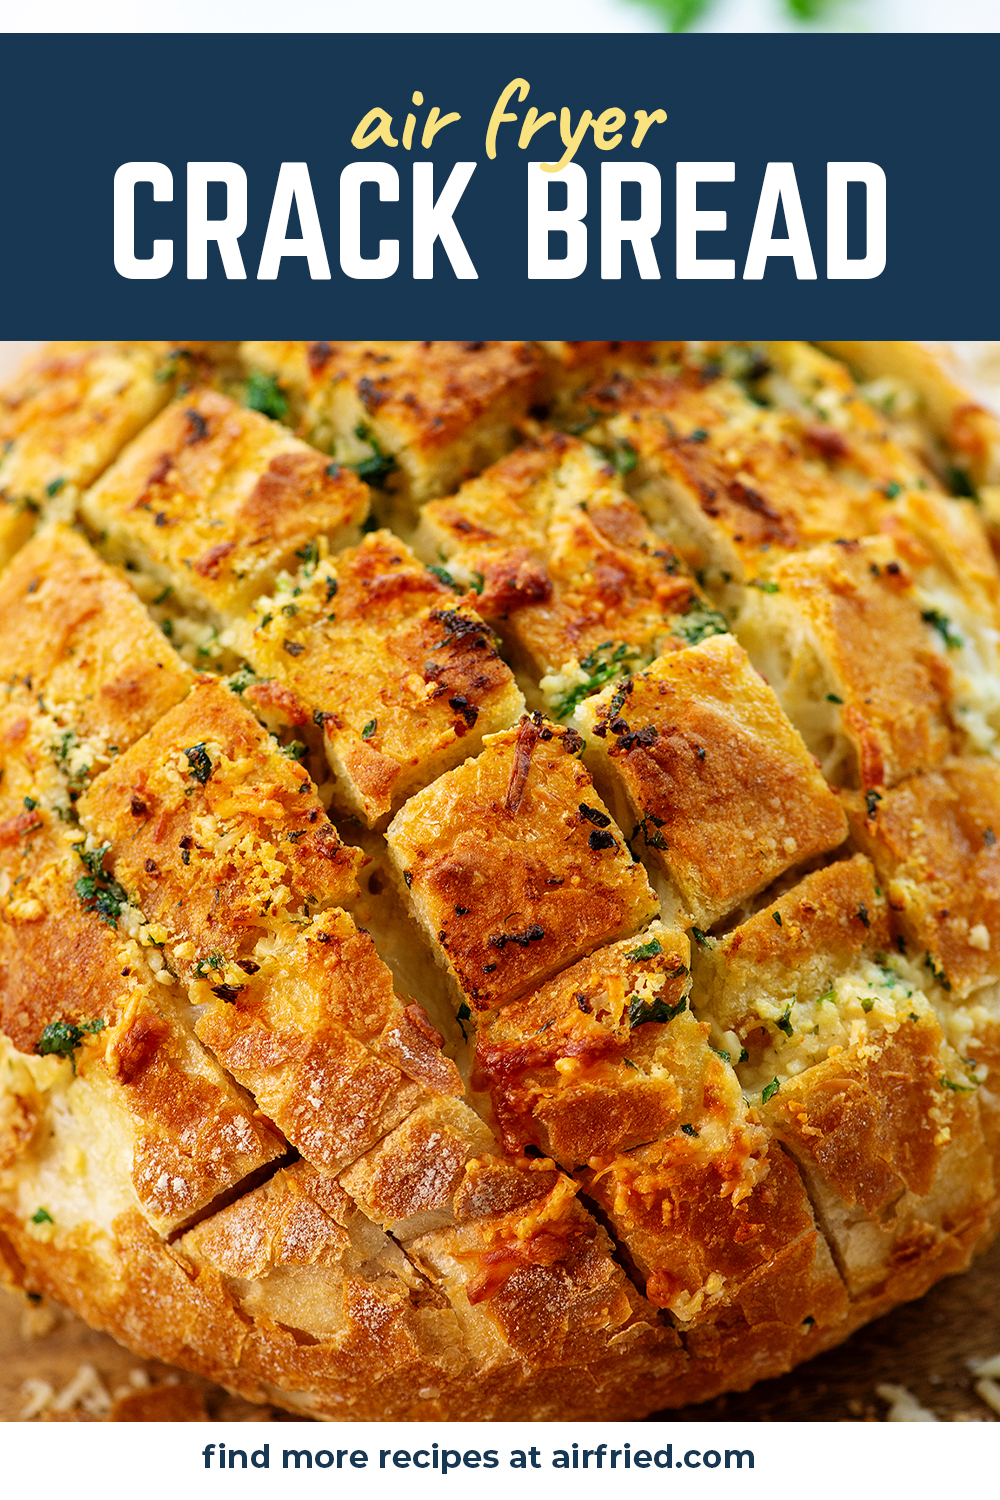 pull apart bread with text for Pinterest.